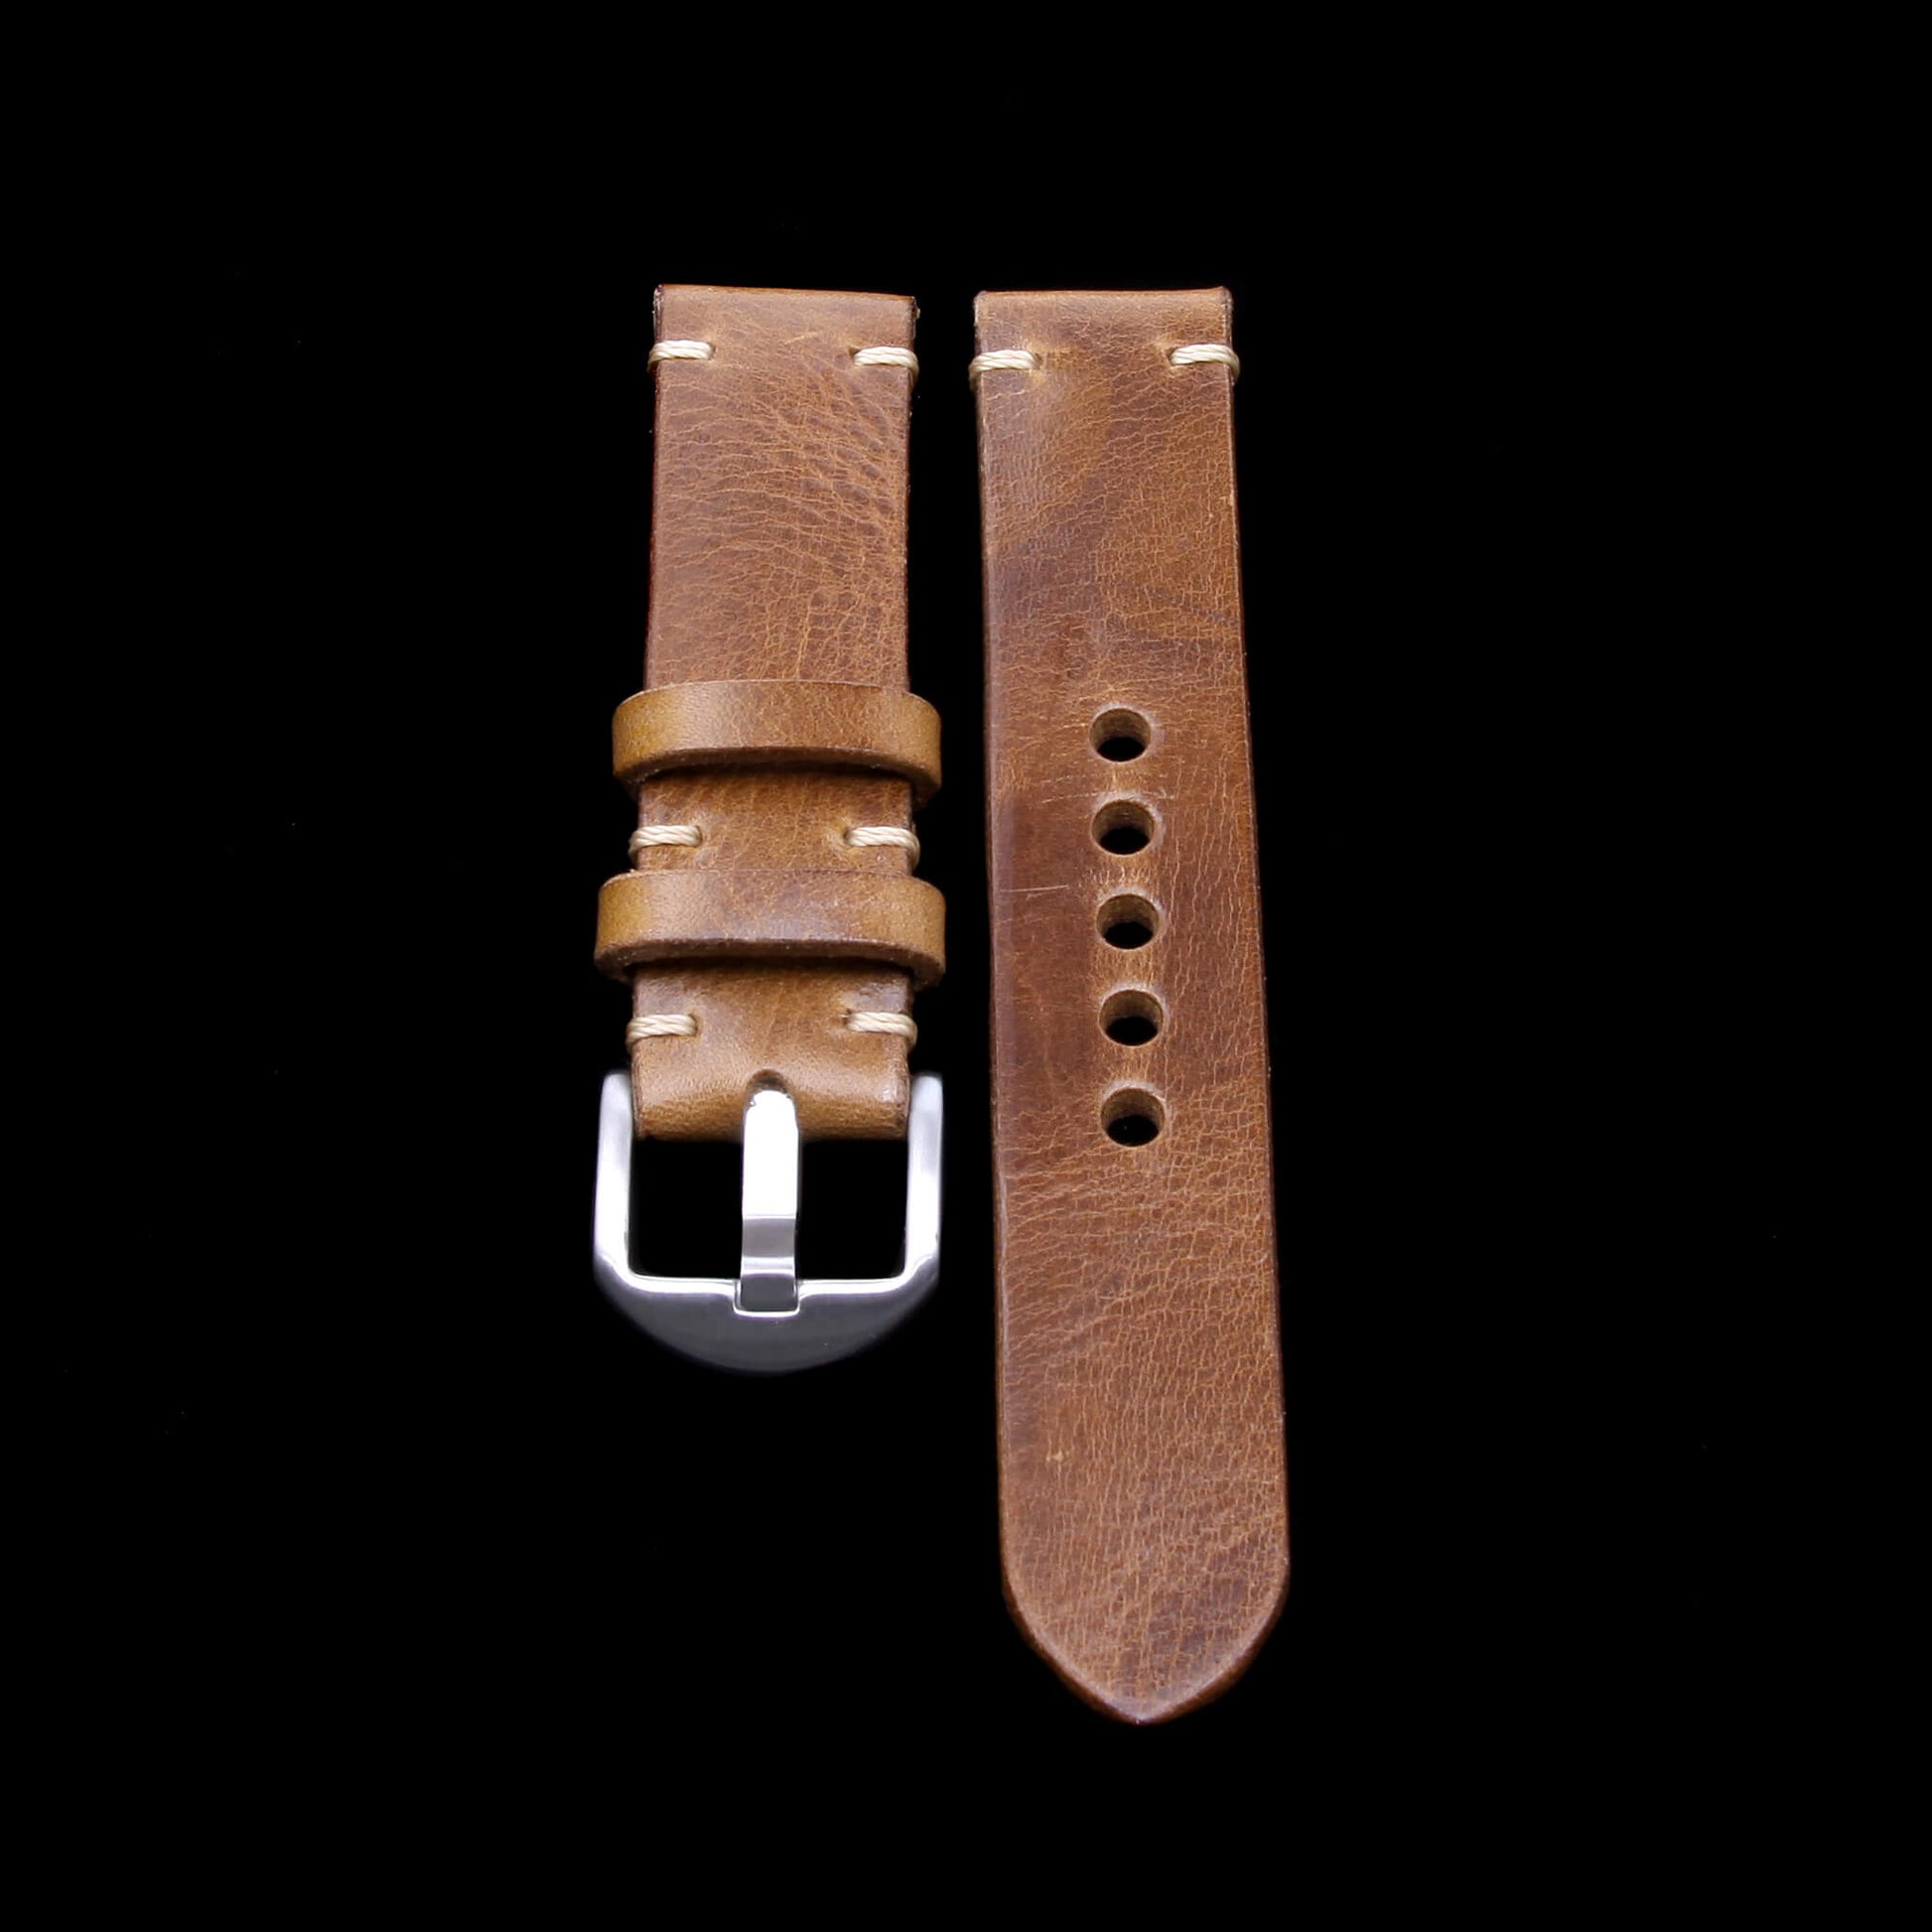 Camo chic meets Italian craftsmanship: Military 102 veg-tanned leather Apple Watch strap, handcrafted for effortless style.